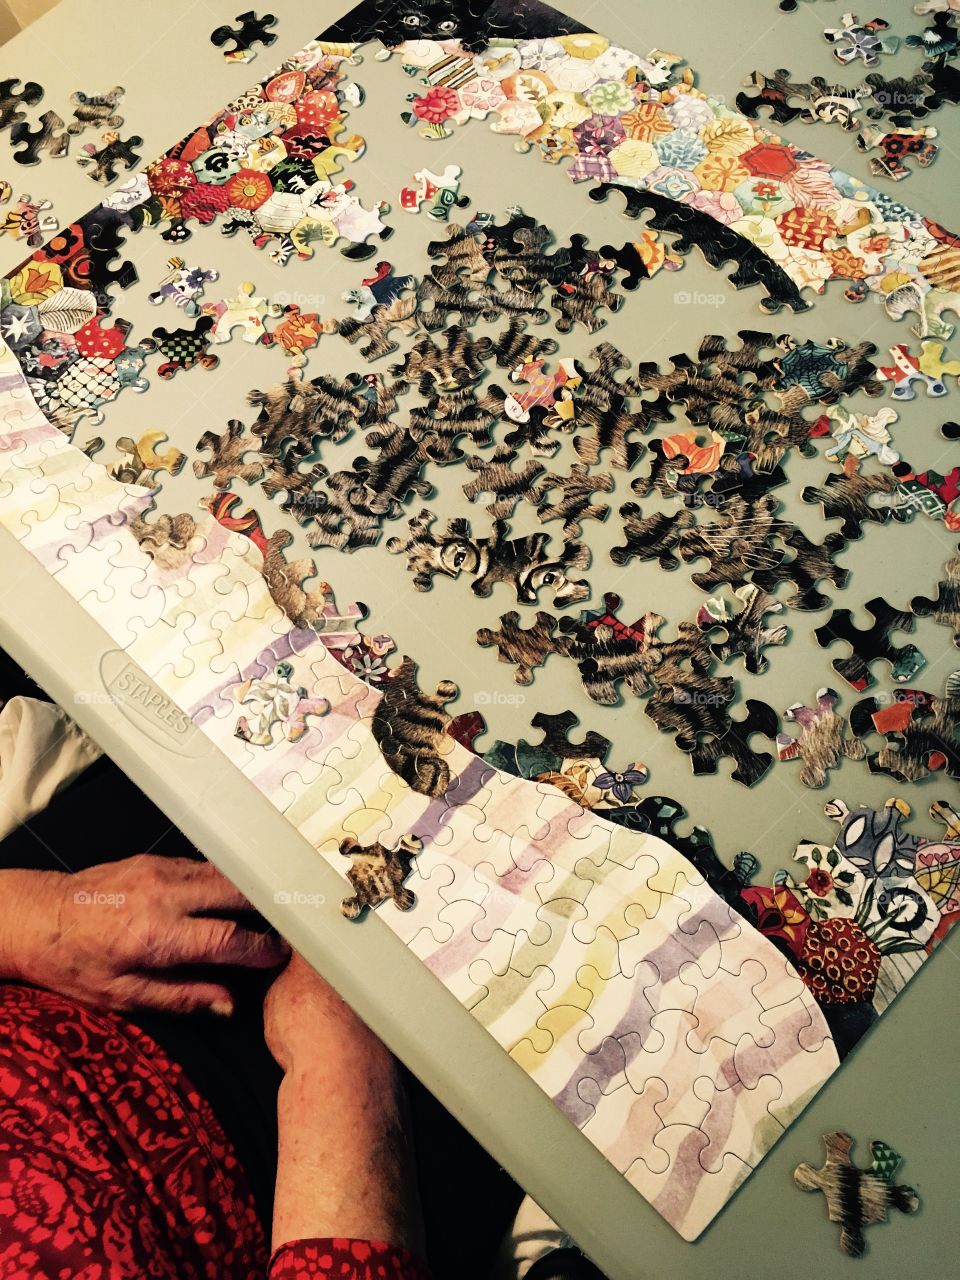 Aging hands / puzzle